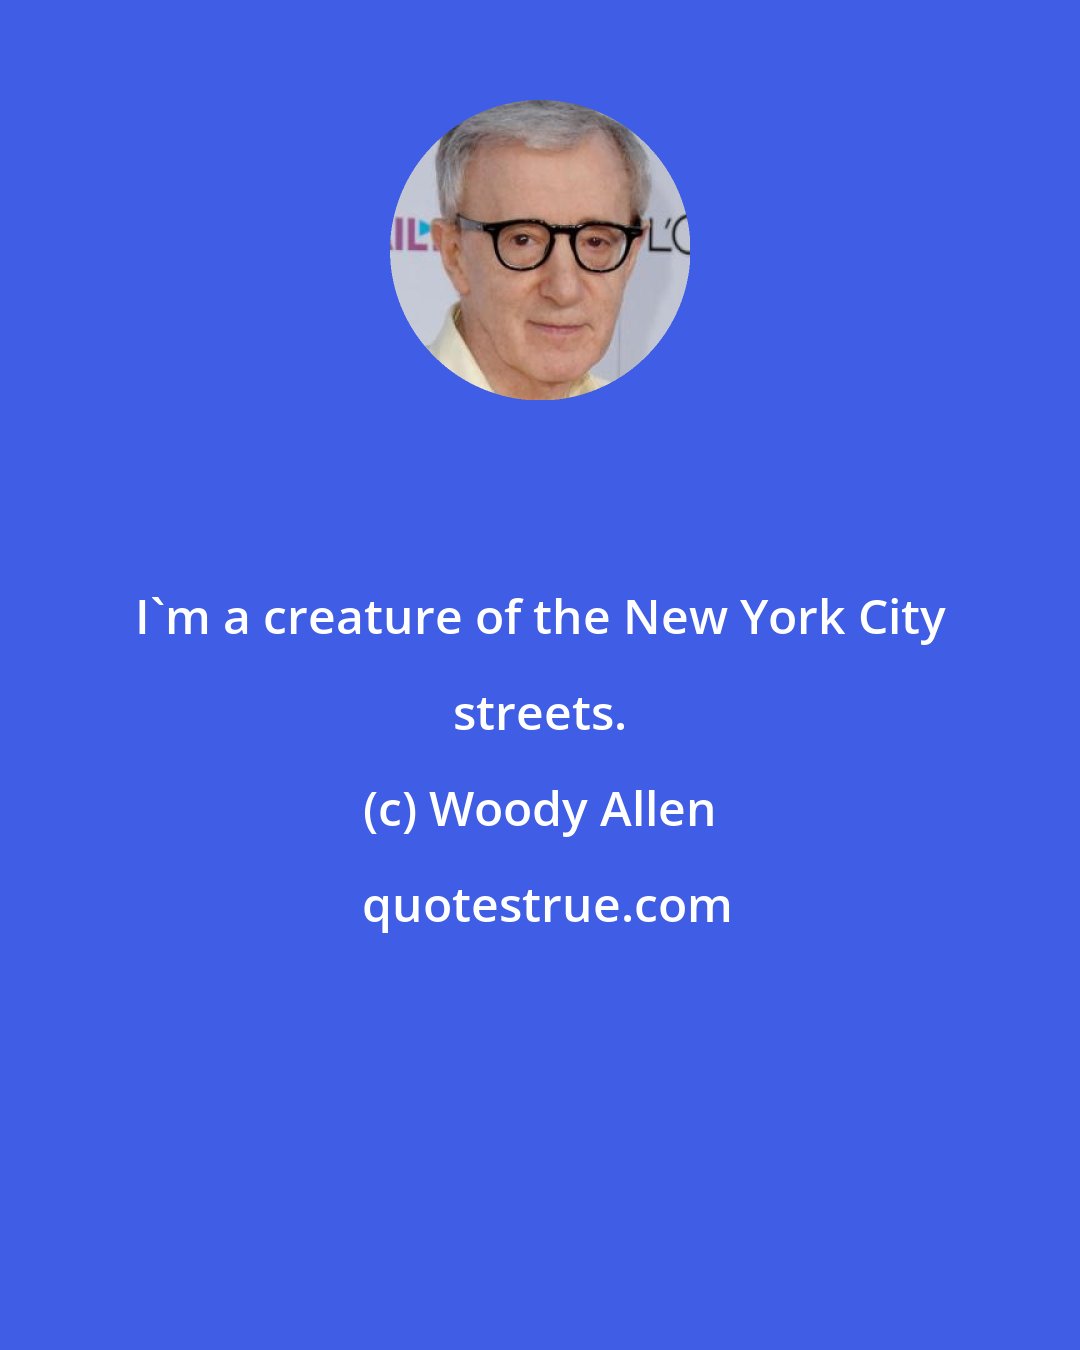 Woody Allen: I'm a creature of the New York City streets.